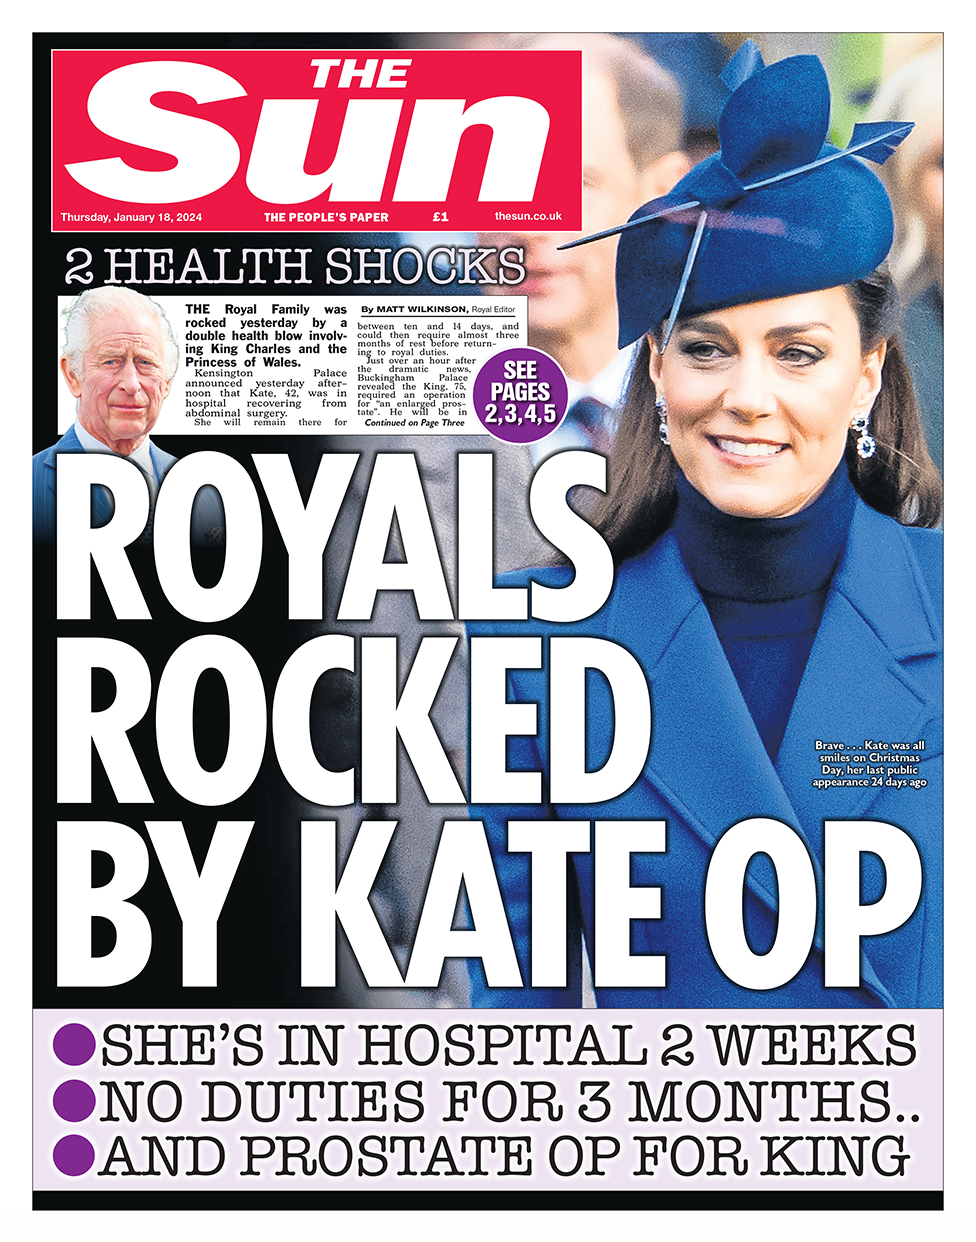 The headline in the Sun reads: "Royals rocked by Kate op".